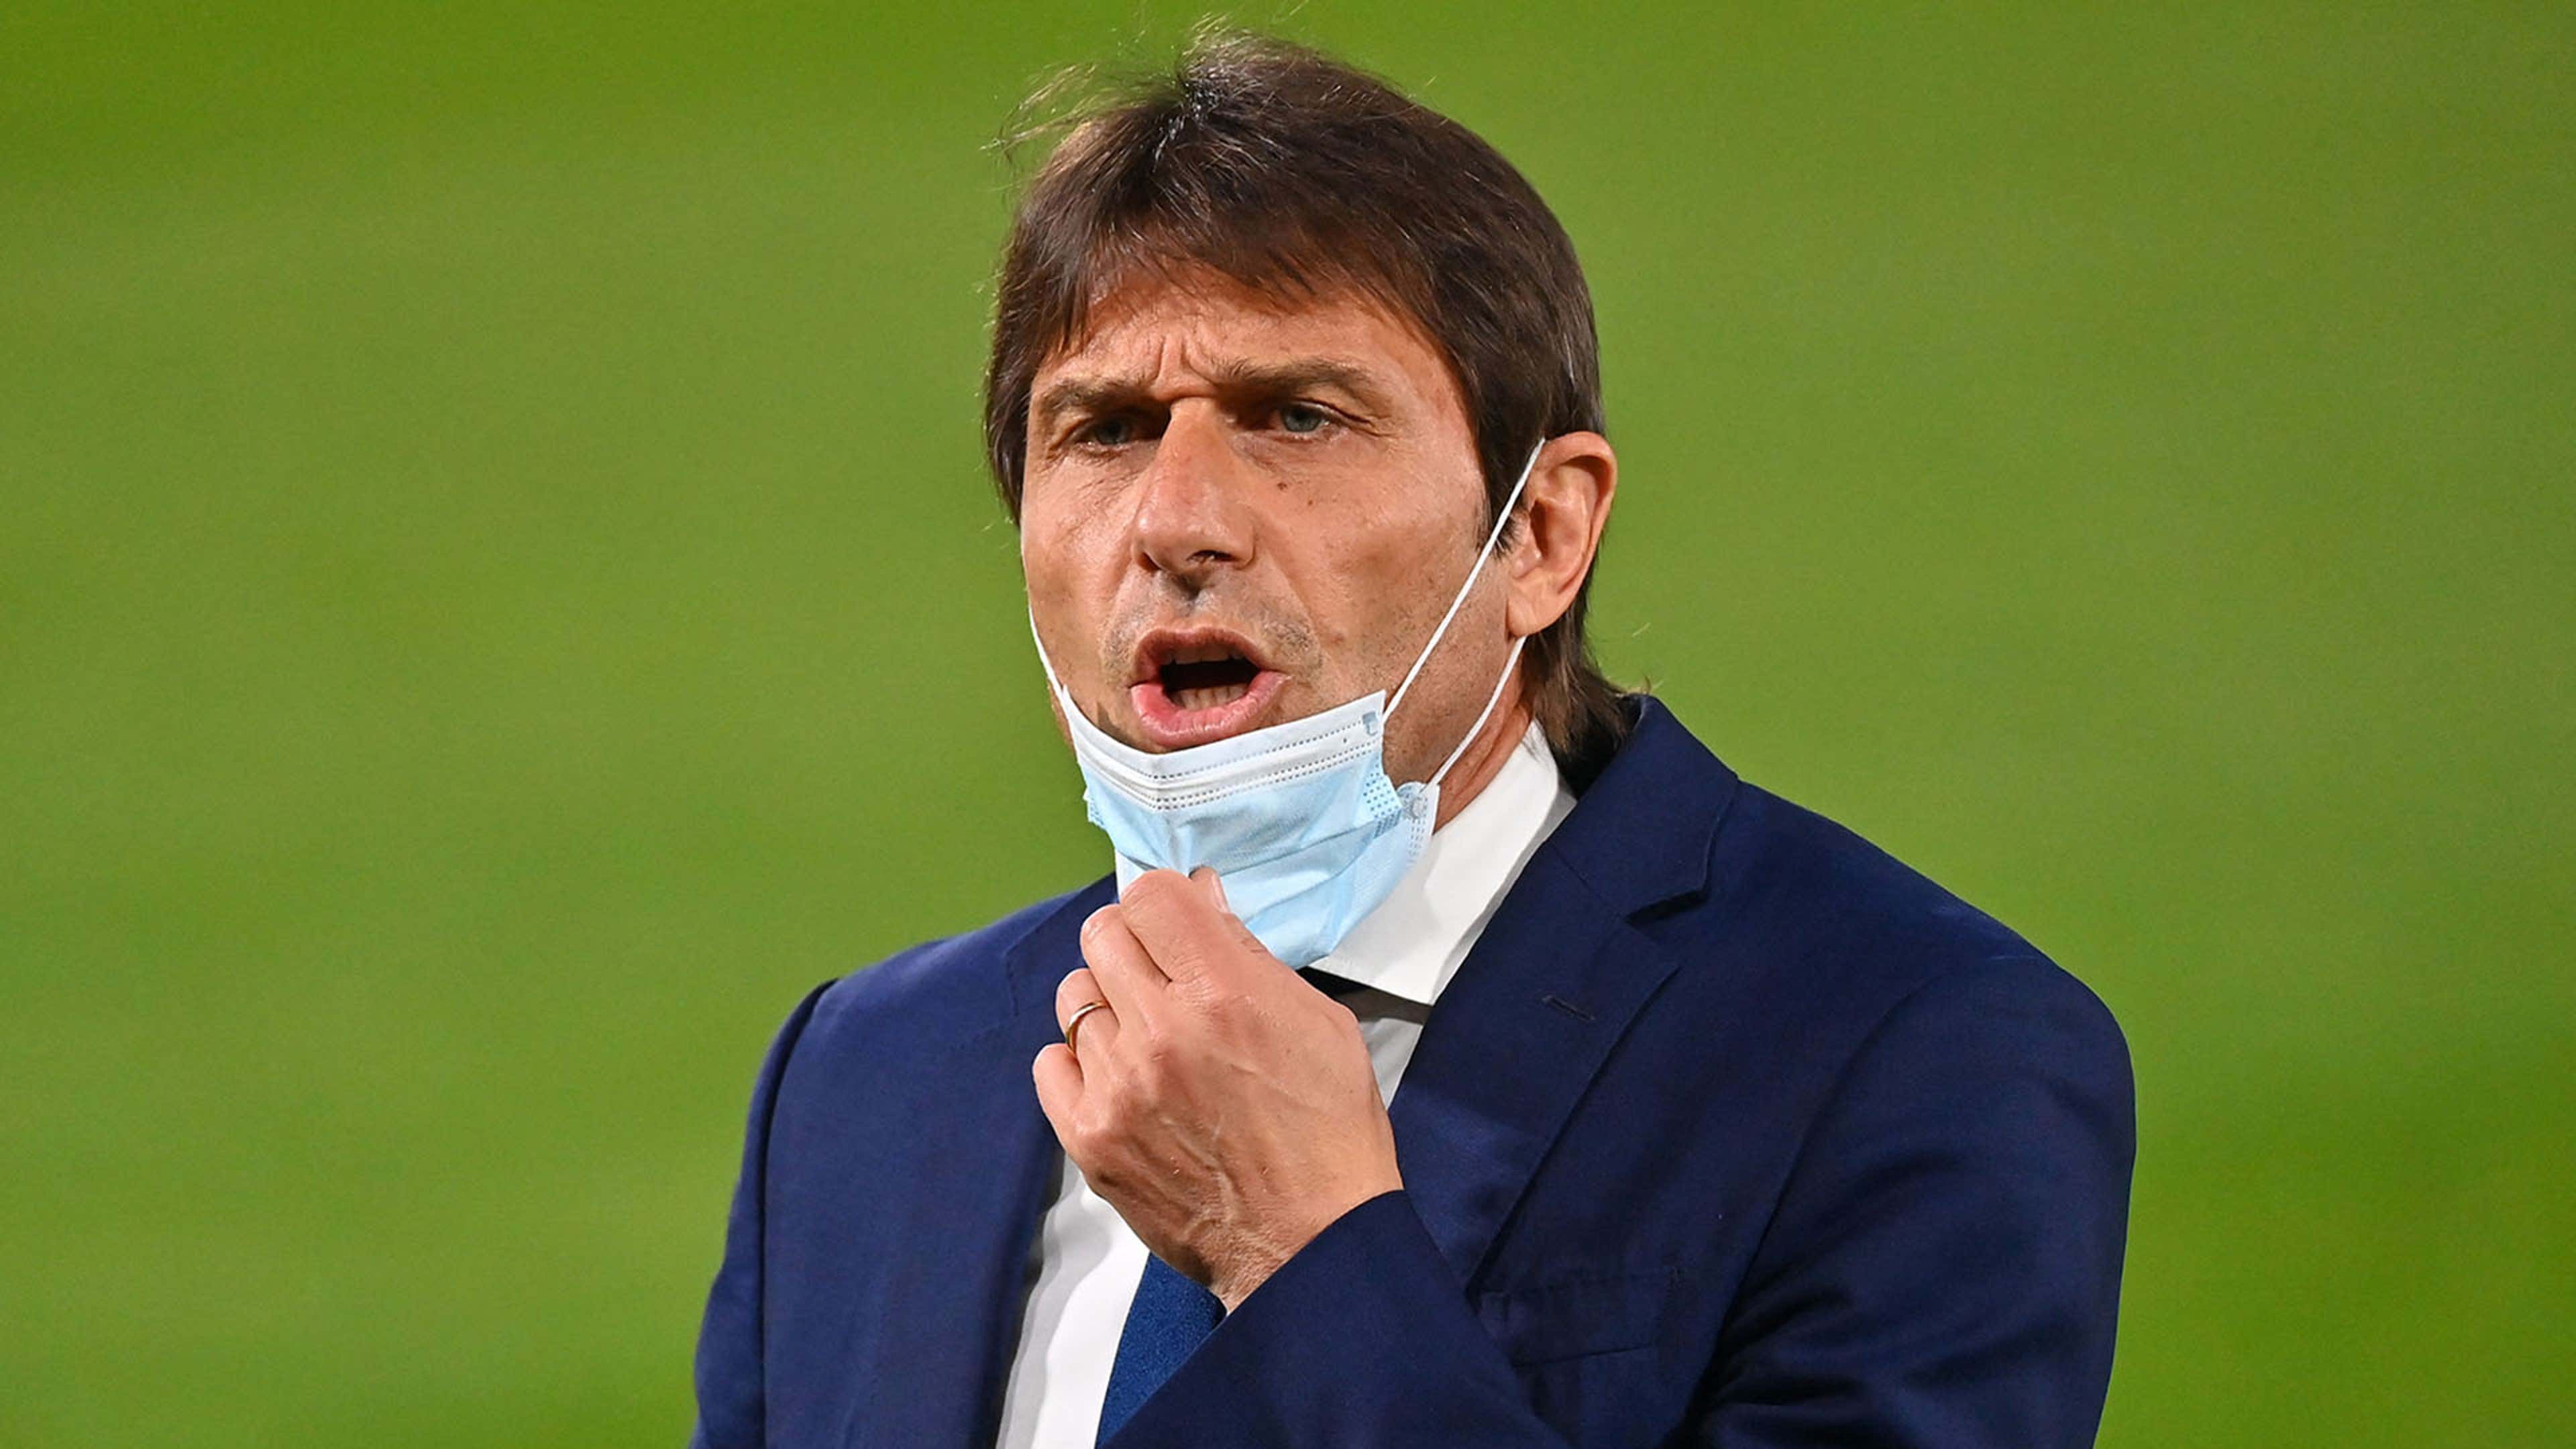 Juventus fans want Antonio Conte to return but what is the club's